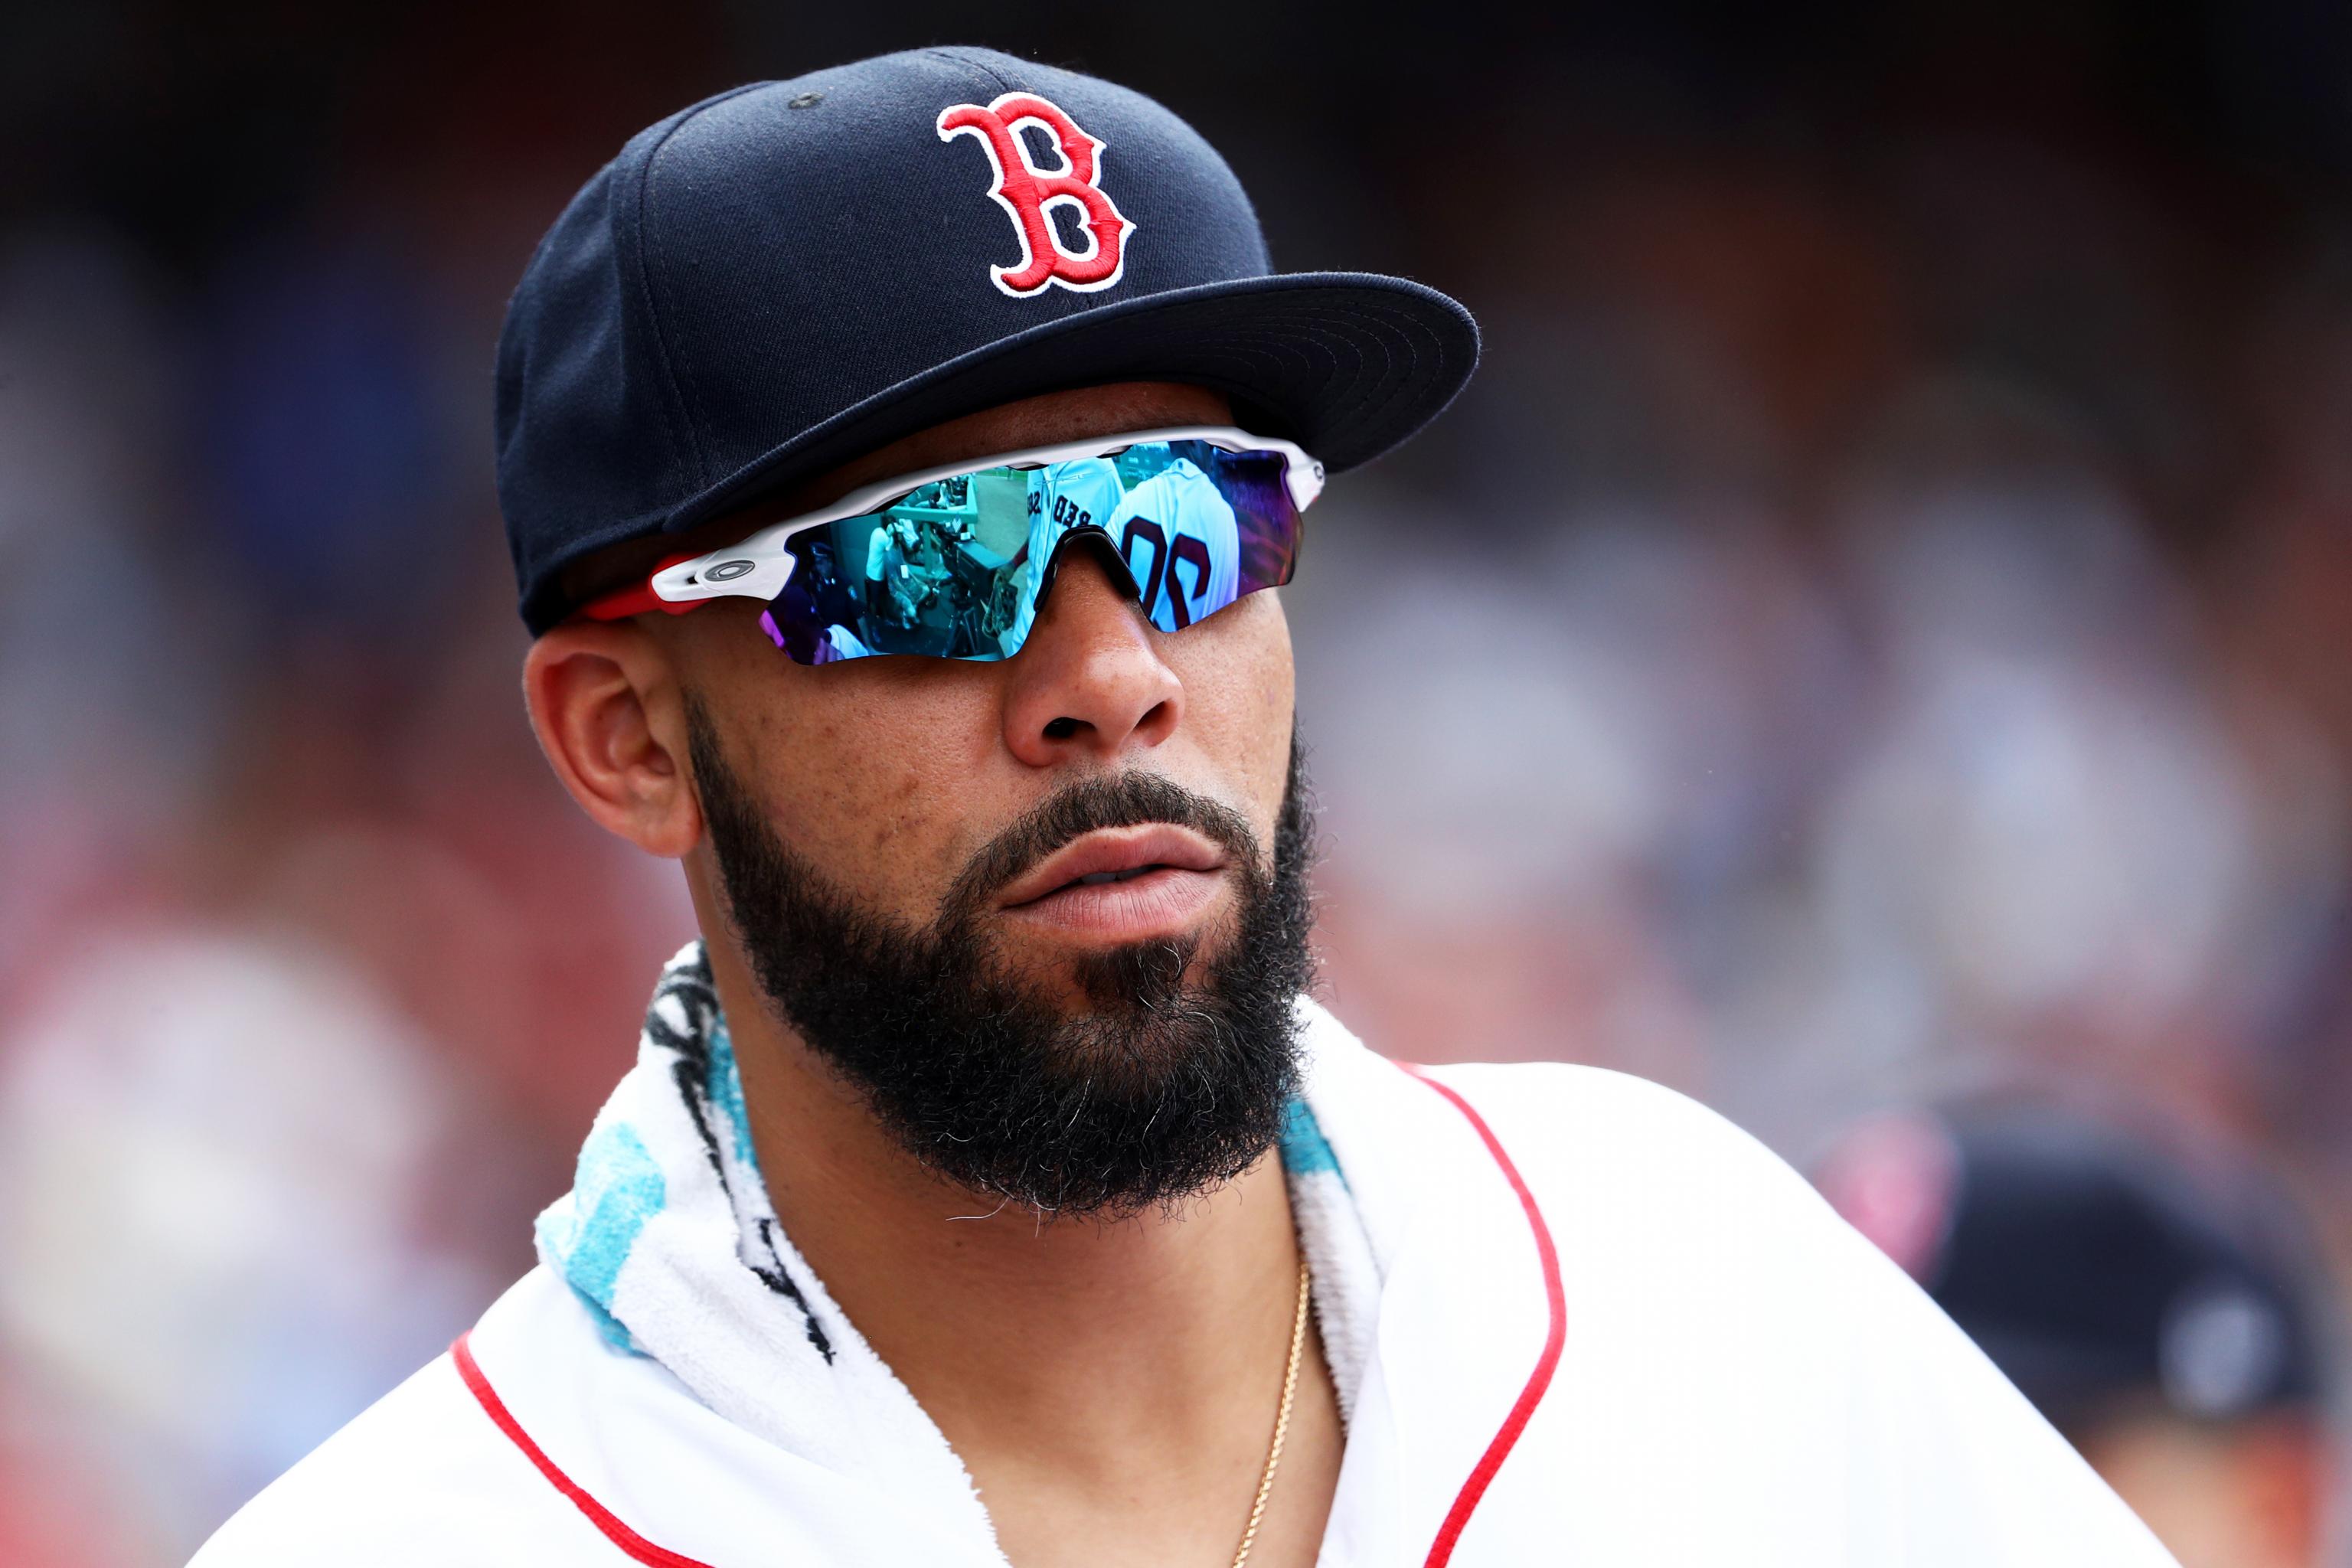 David Price again rips Dennis Eckersley, this time for answering a